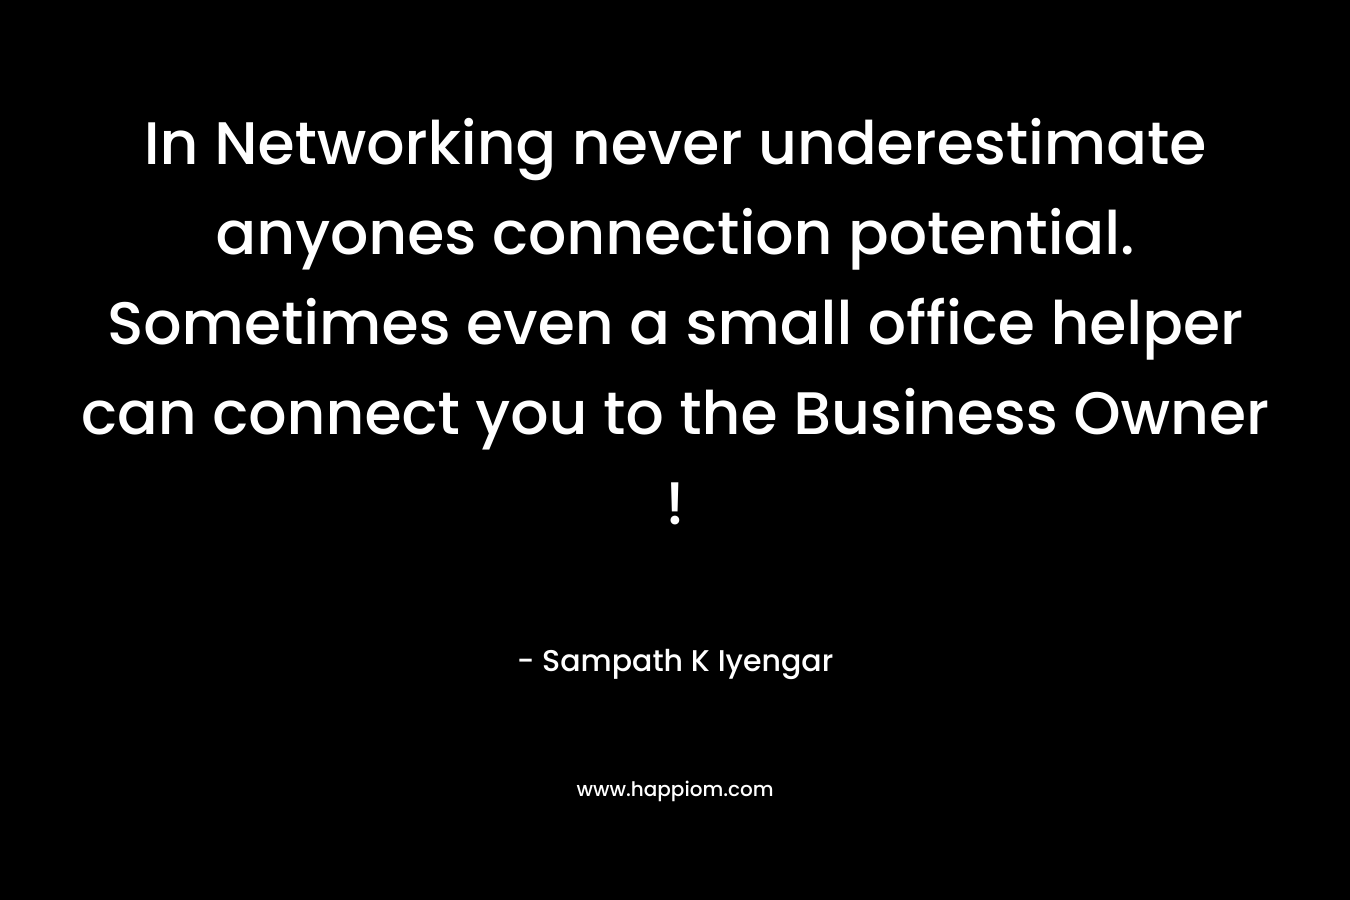 In Networking never underestimate anyones connection potential. Sometimes even a small office helper can connect you to the Business Owner ! – Sampath K Iyengar